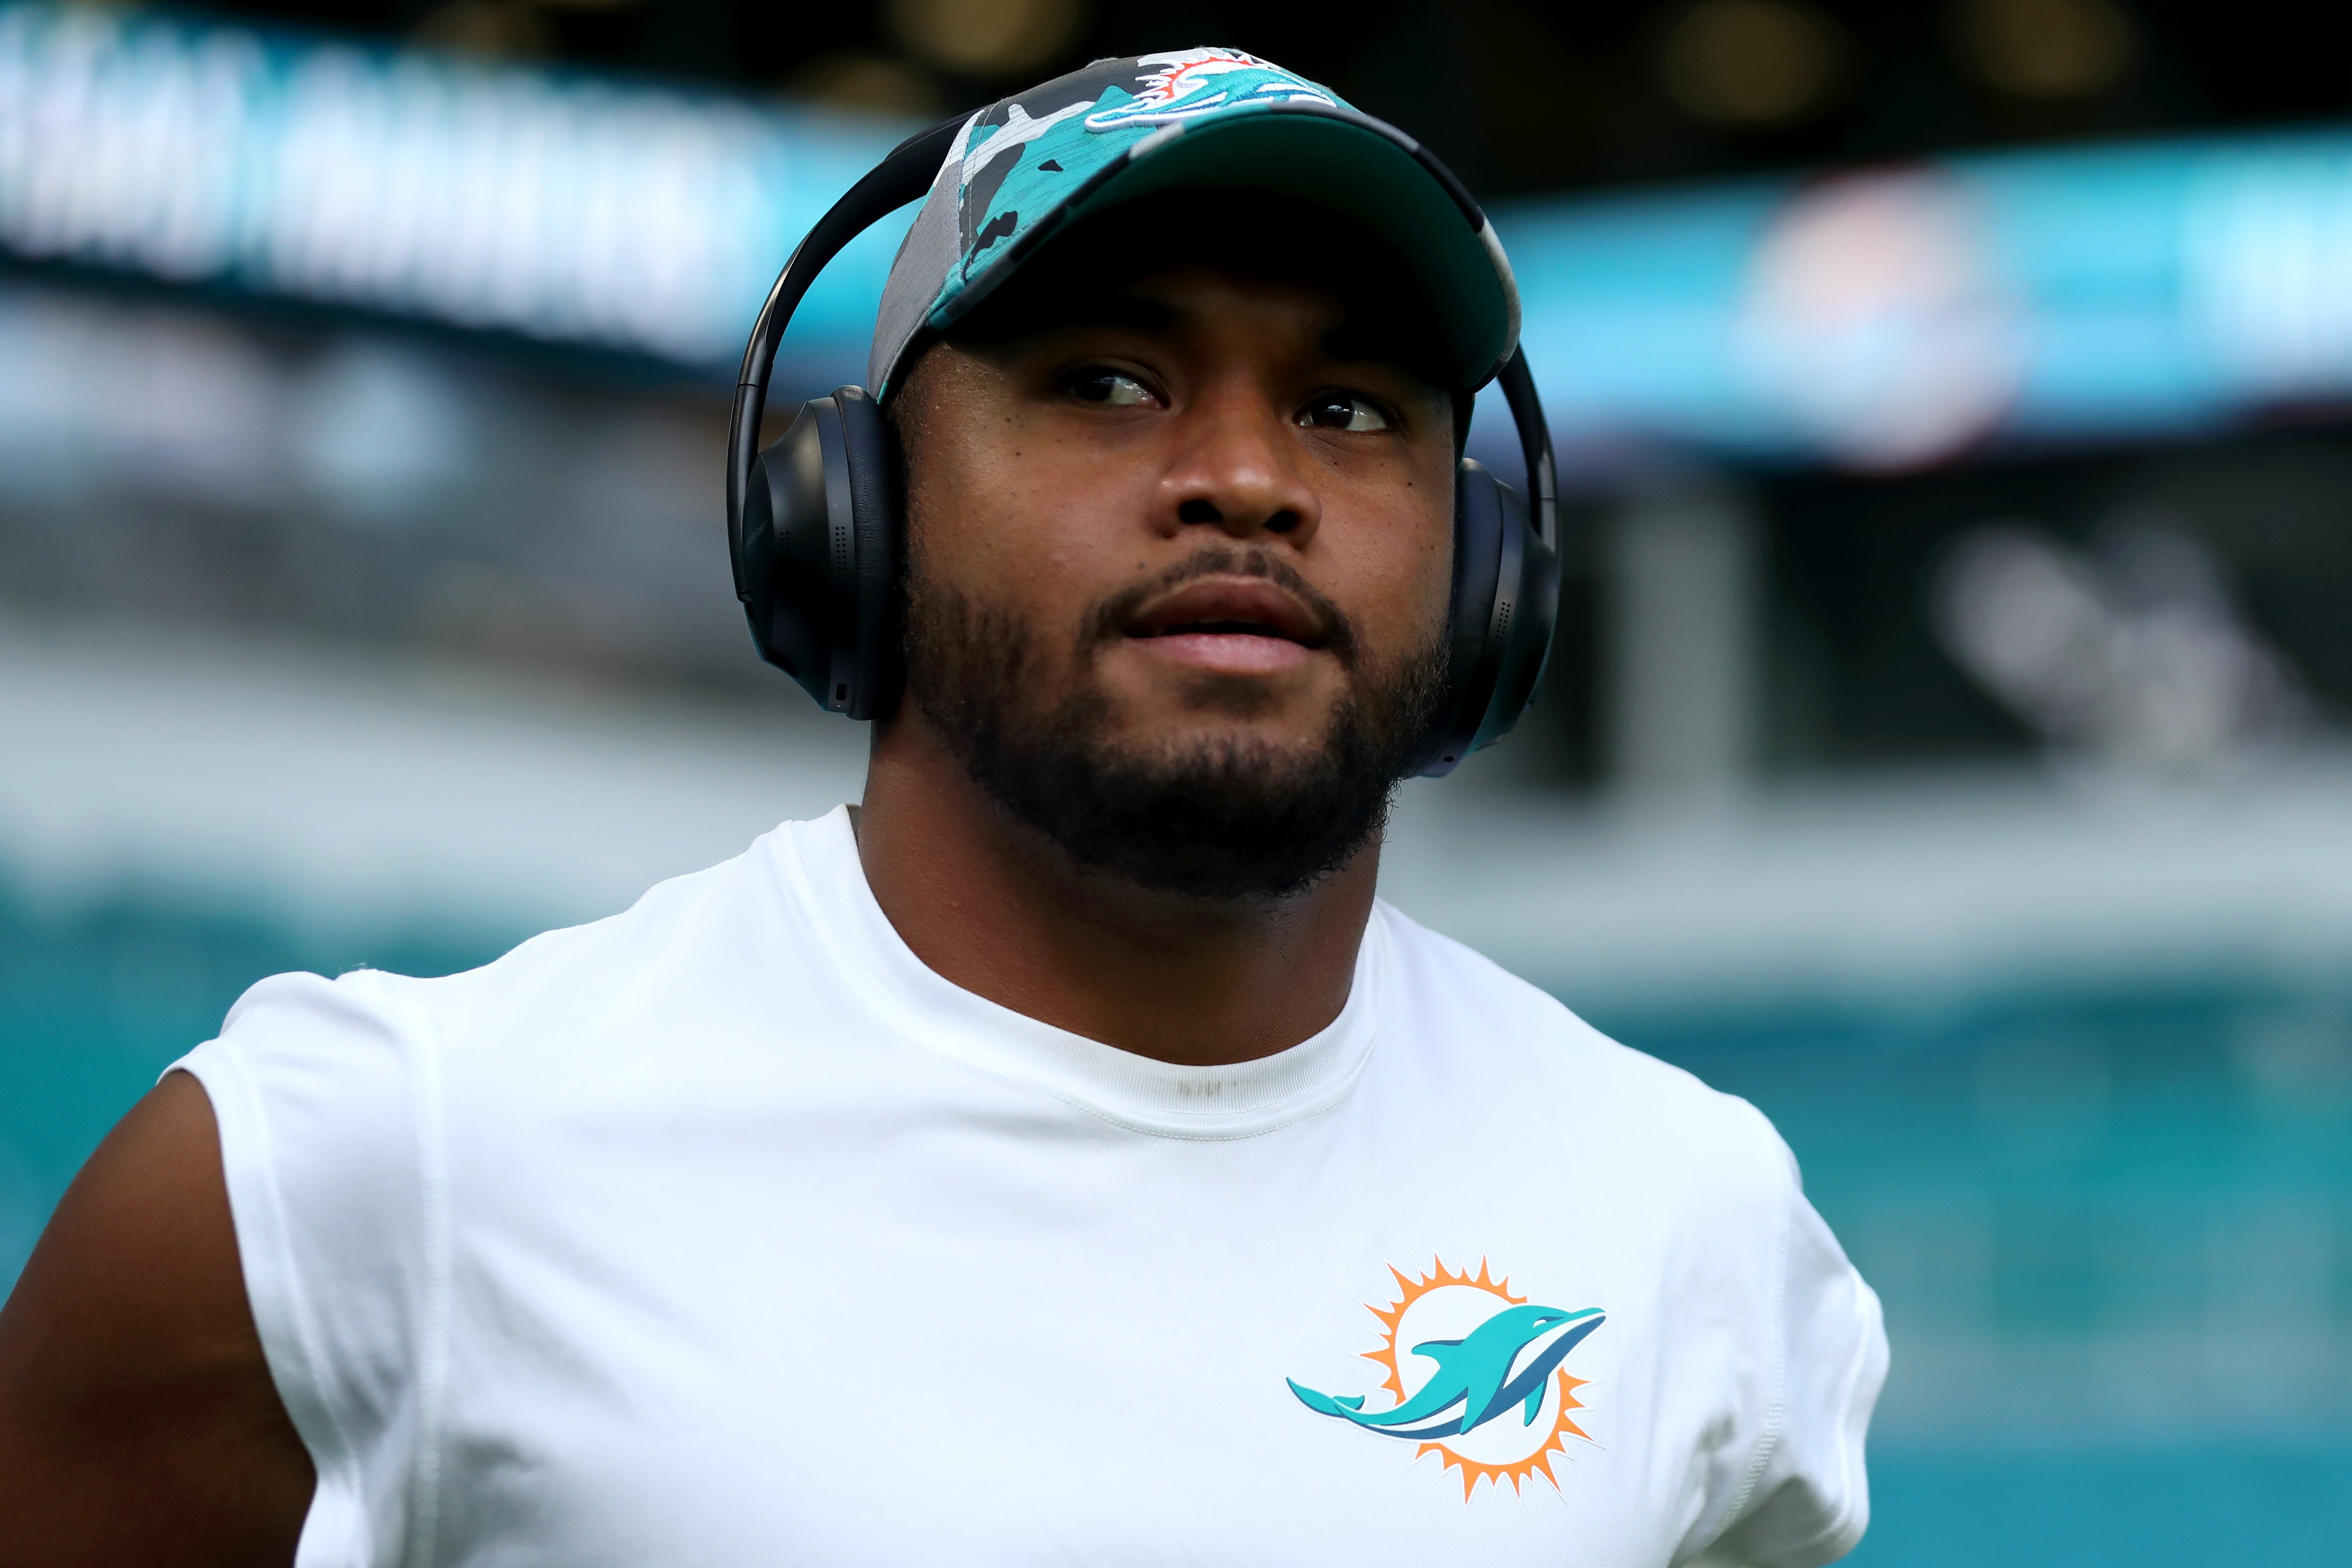 Miami Dolphins quarterback Tua Tagovailoa, who's married to Annah Gore, takes the field wearing headphones prior to a game against the Las Vegas Raiders